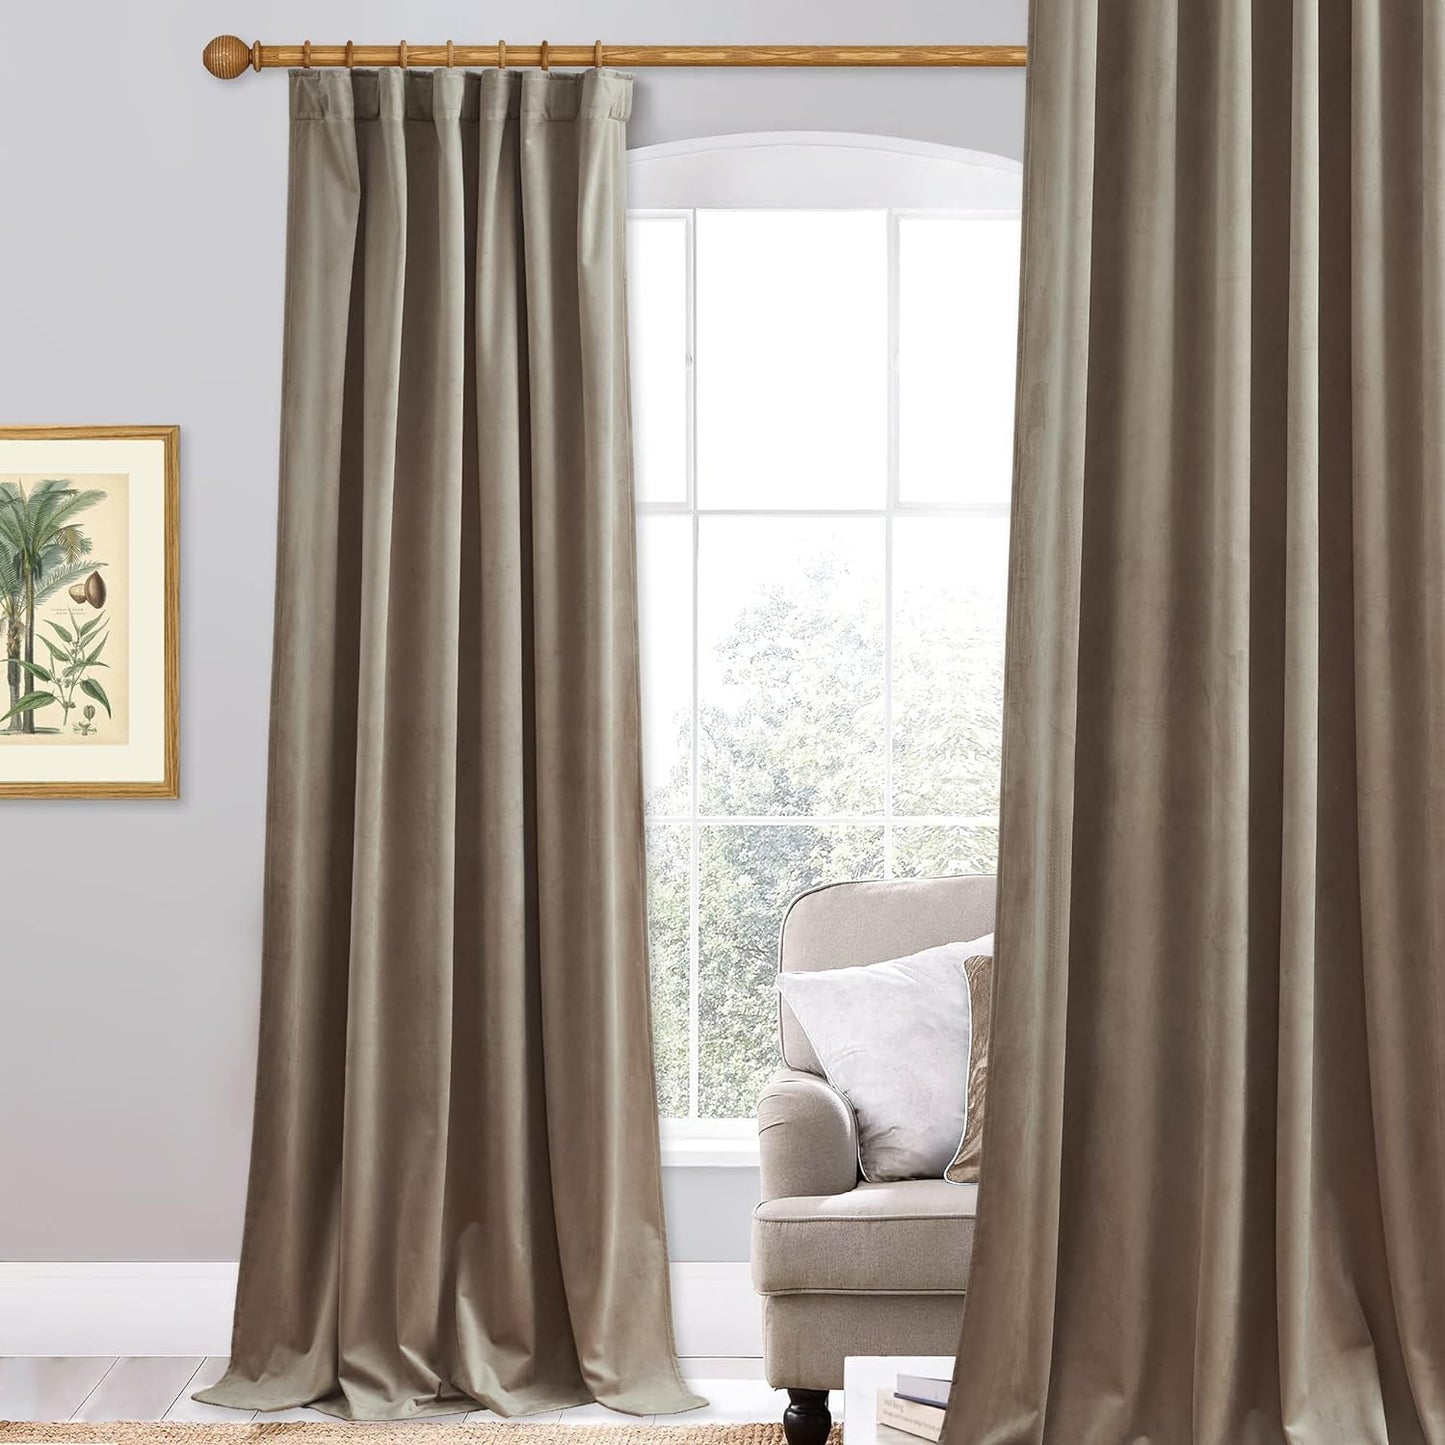 Stangh Navy Blue Velvet Curtains 96 Inches Long for Living Room, Luxury Blackout Sliding Door Curtains Thermal Insulated Window Drapes for Bedroom, W52 X L96 Inches, 1 Panel  StangH Camel Beige W52 X L84 